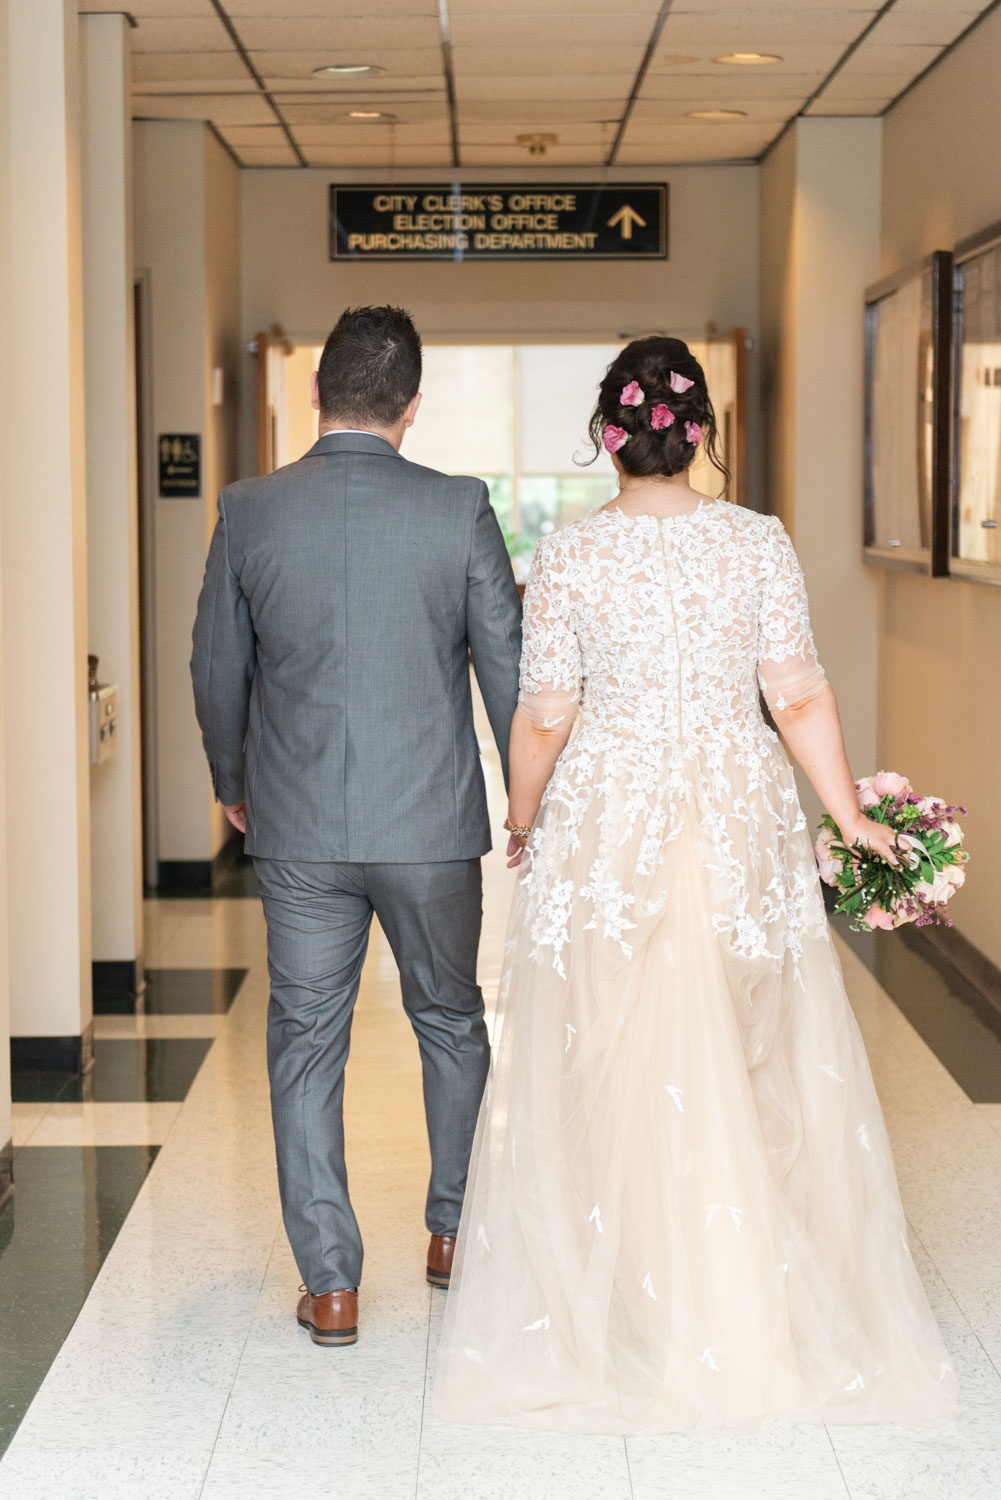 Olga + Albion | Whimsical Quincy City Hall Summer Wedding | Boston and New England Wedding Photography | Lorna Stell Photo